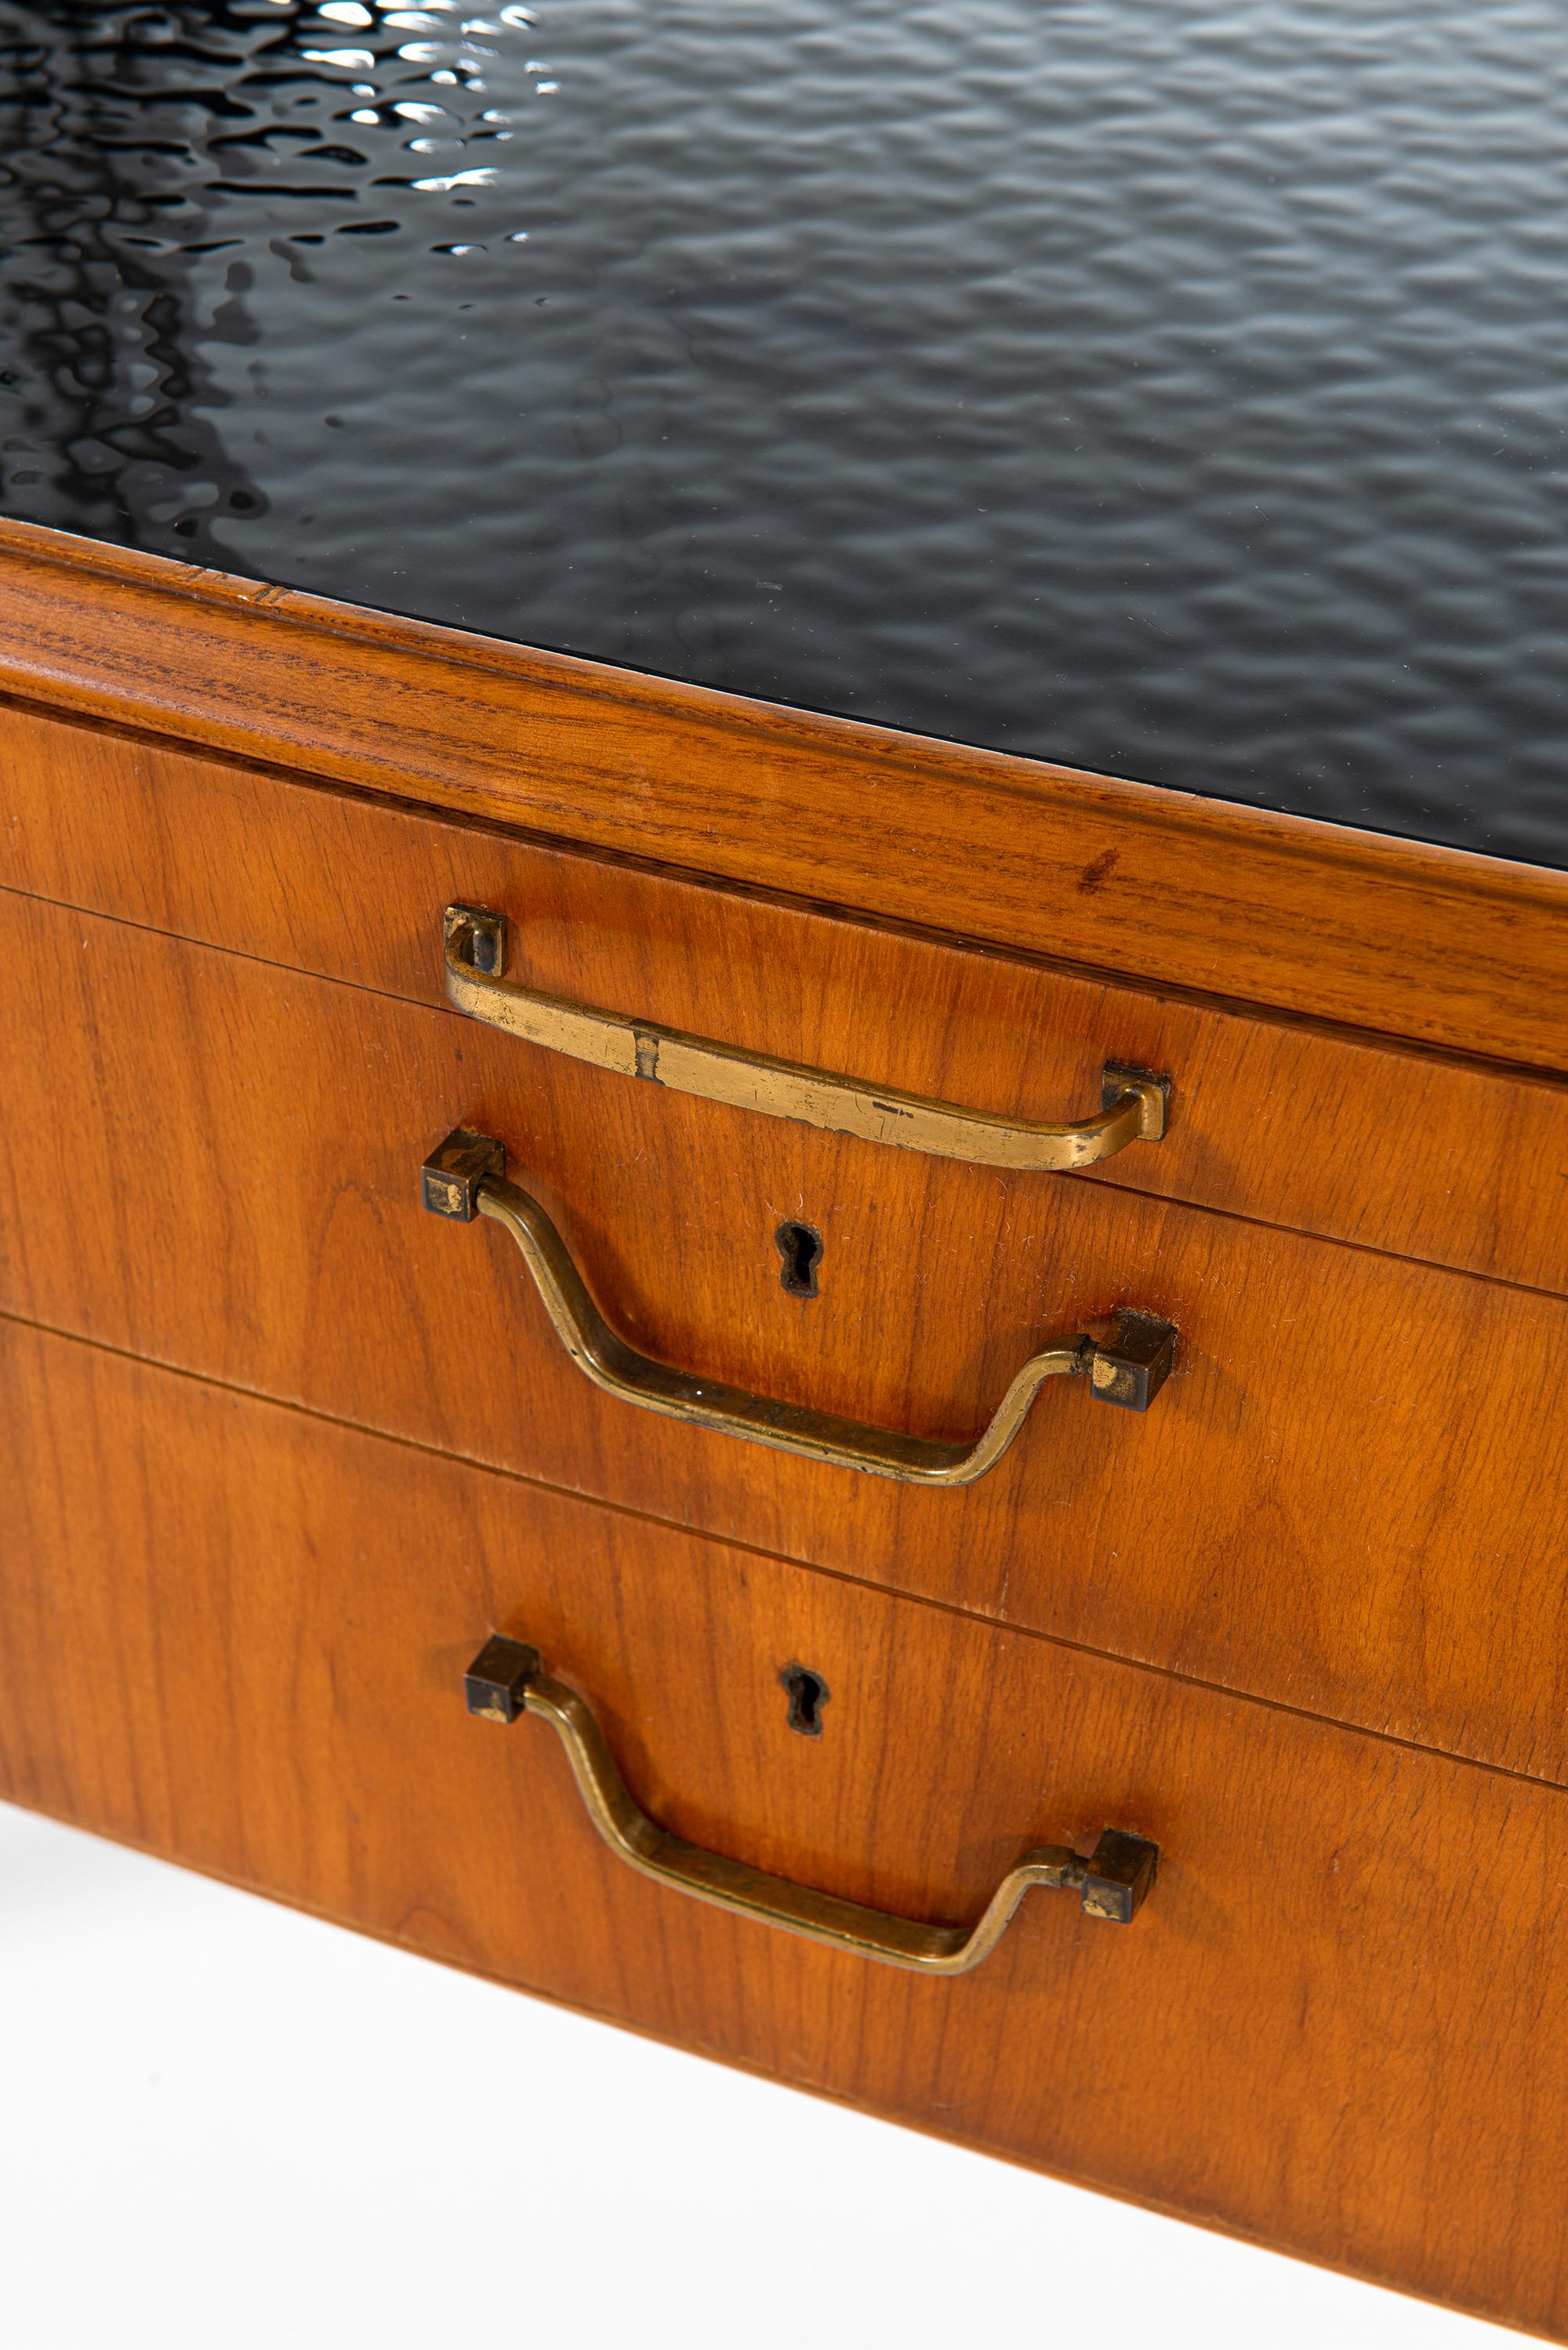 Rare bureau / sideboard designed by Axel Larsson. Produced by Bodafors in Sweden.